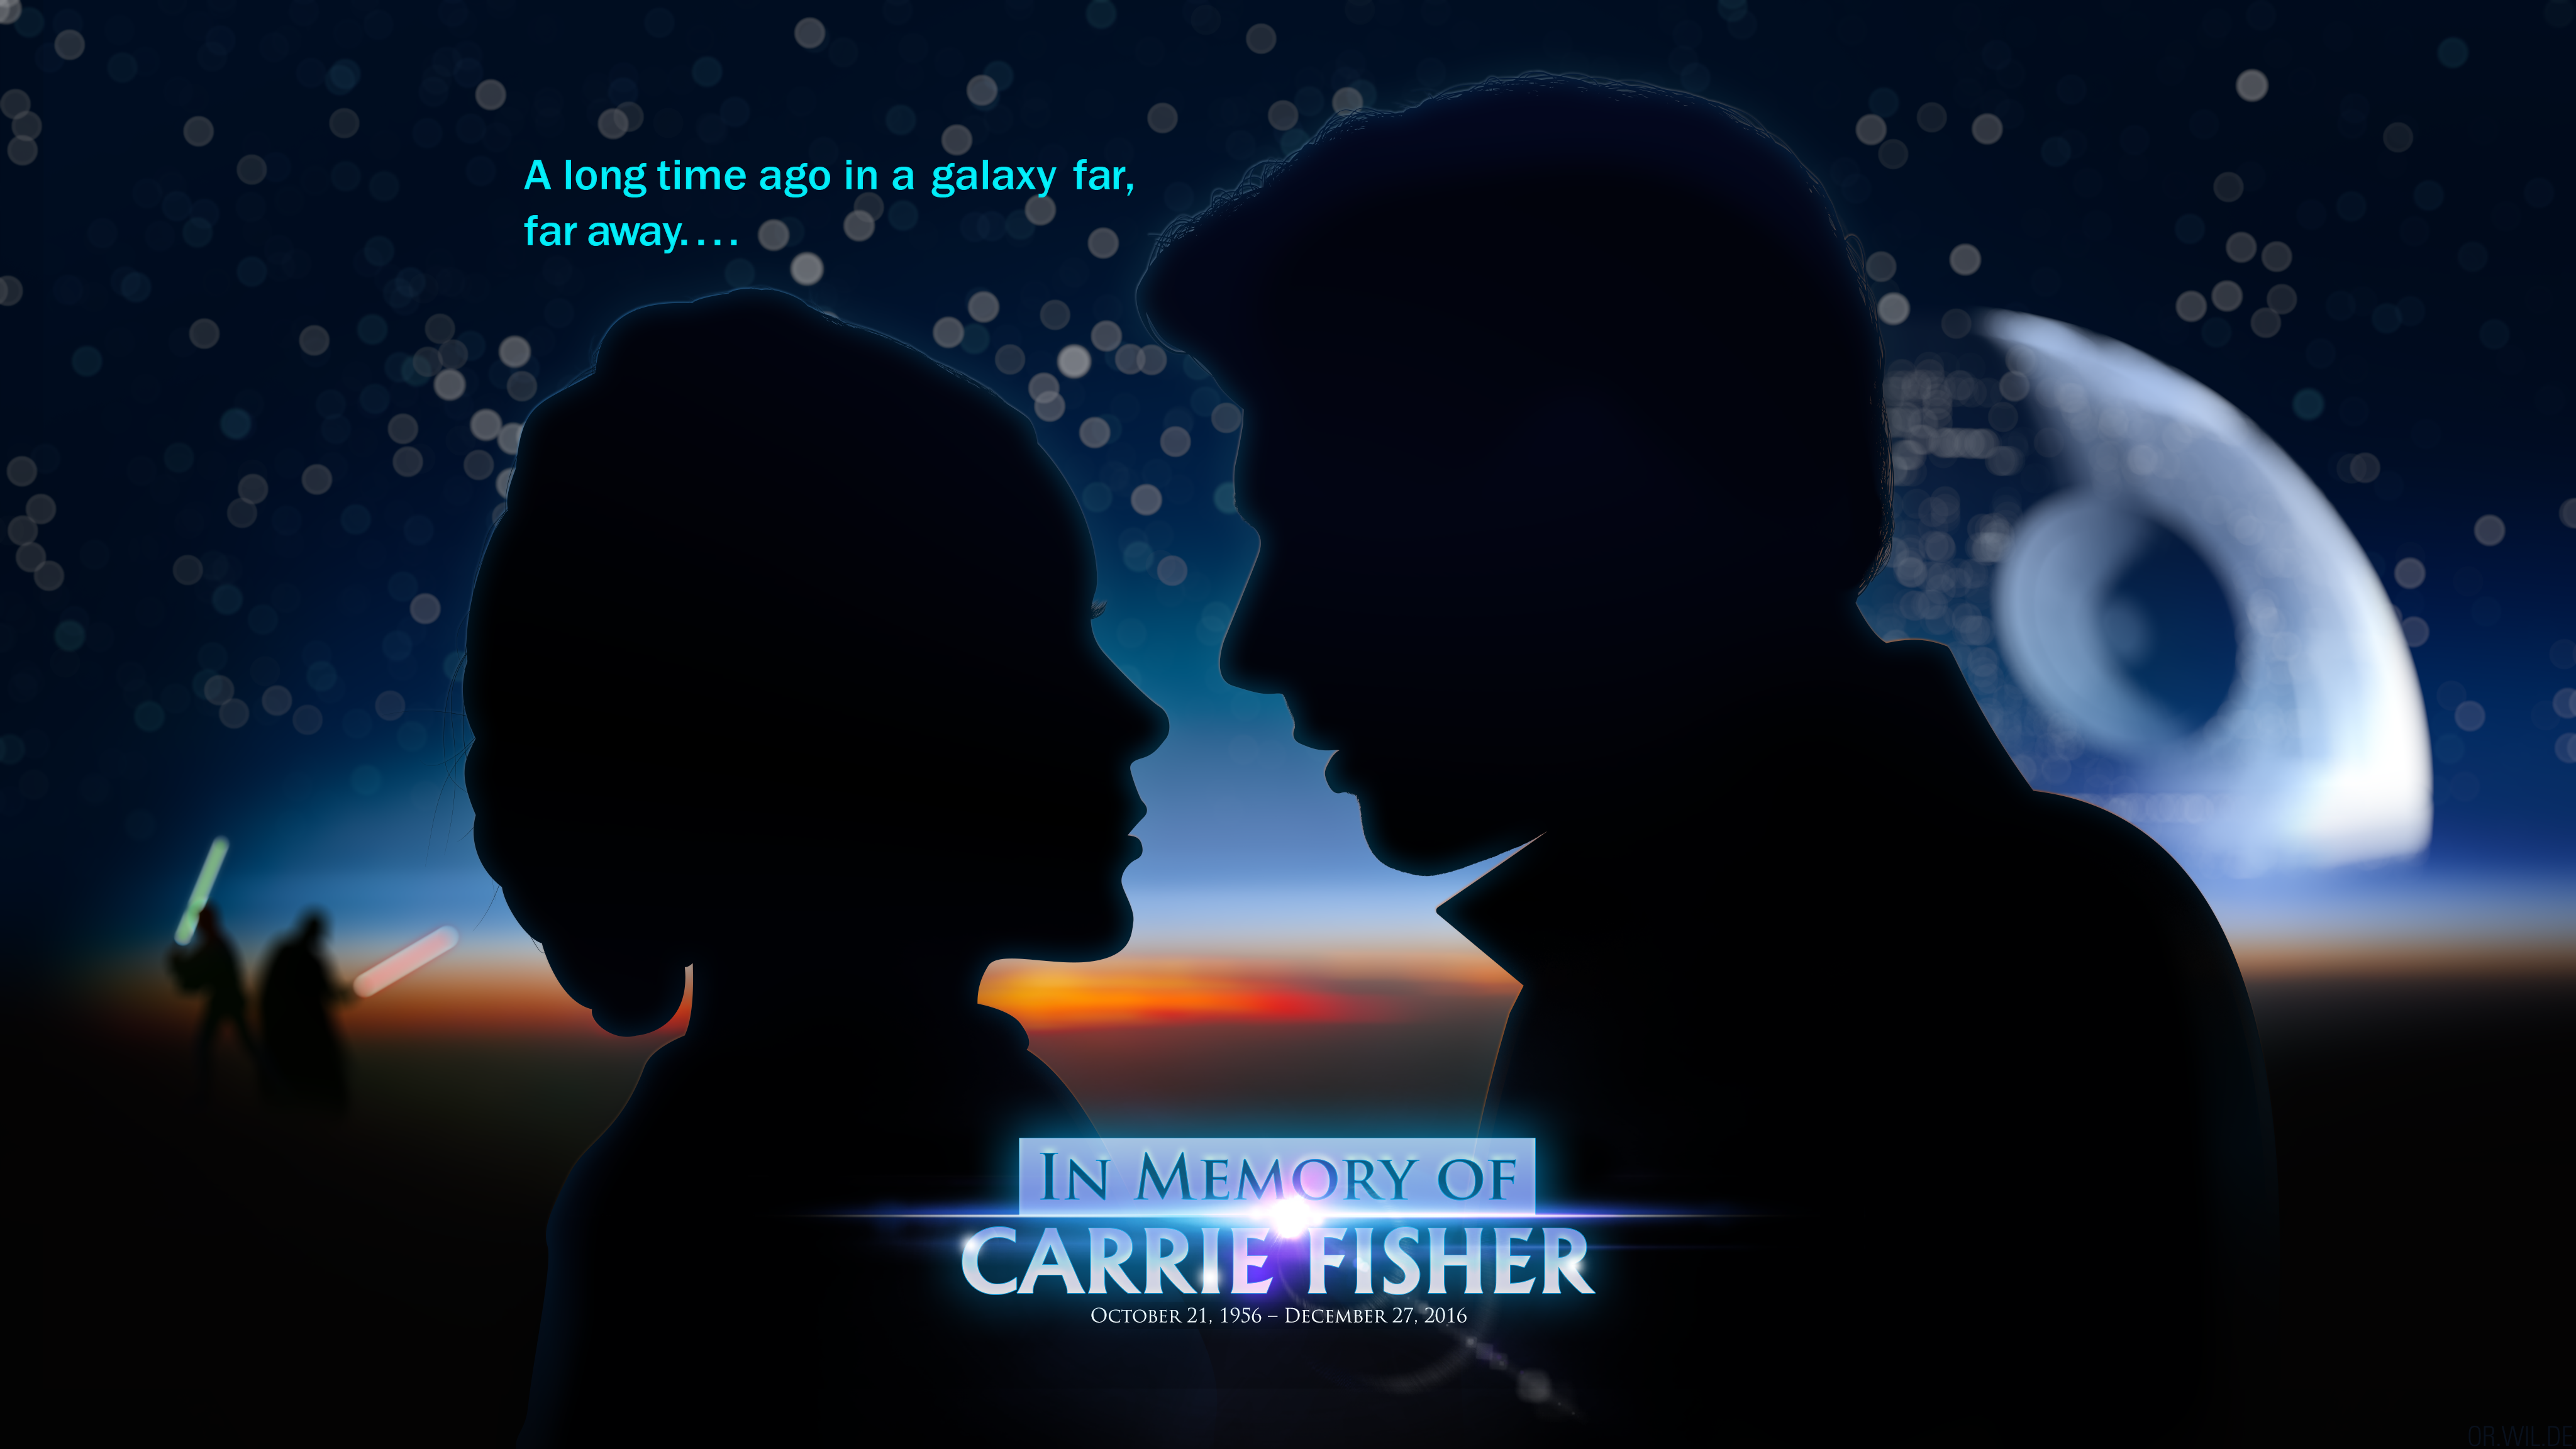 Star Wars Carrie Fisher Harrison Ford 4096x2304